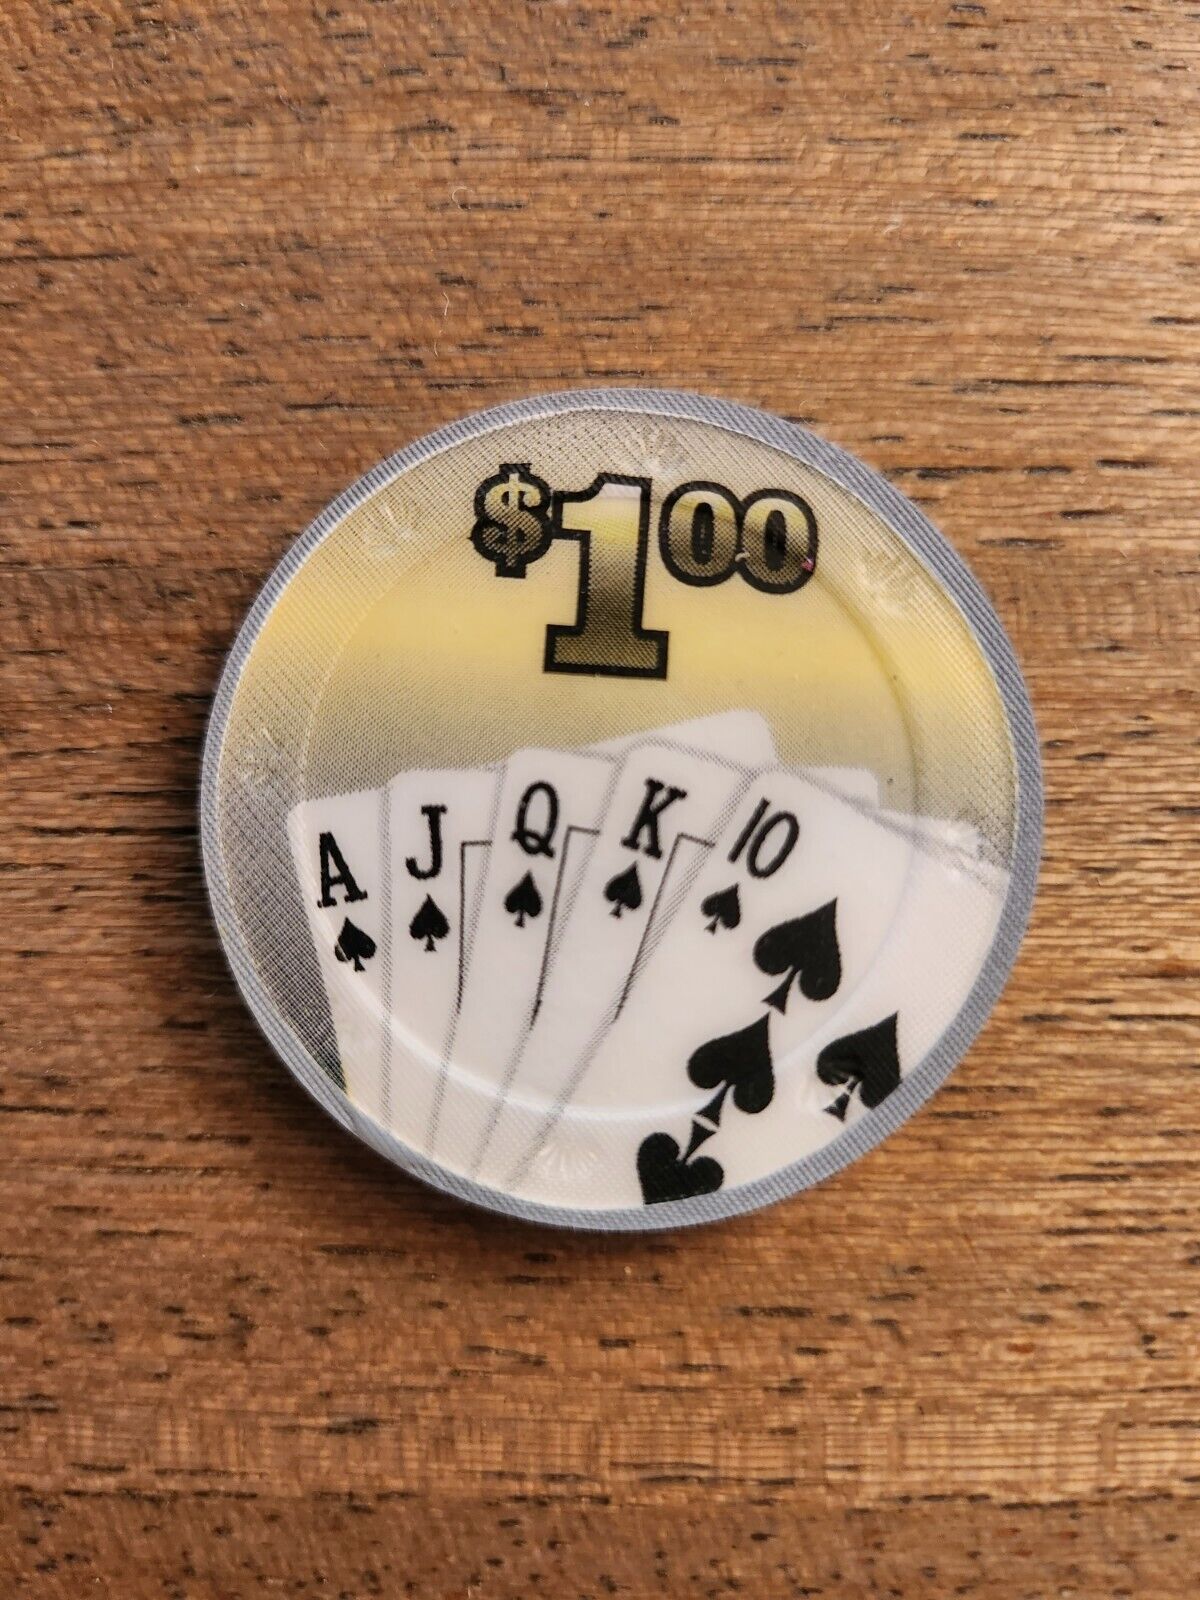 1 x Authentic New BCC Fan of Card Poker Real Clay 10g -  $1 Chip